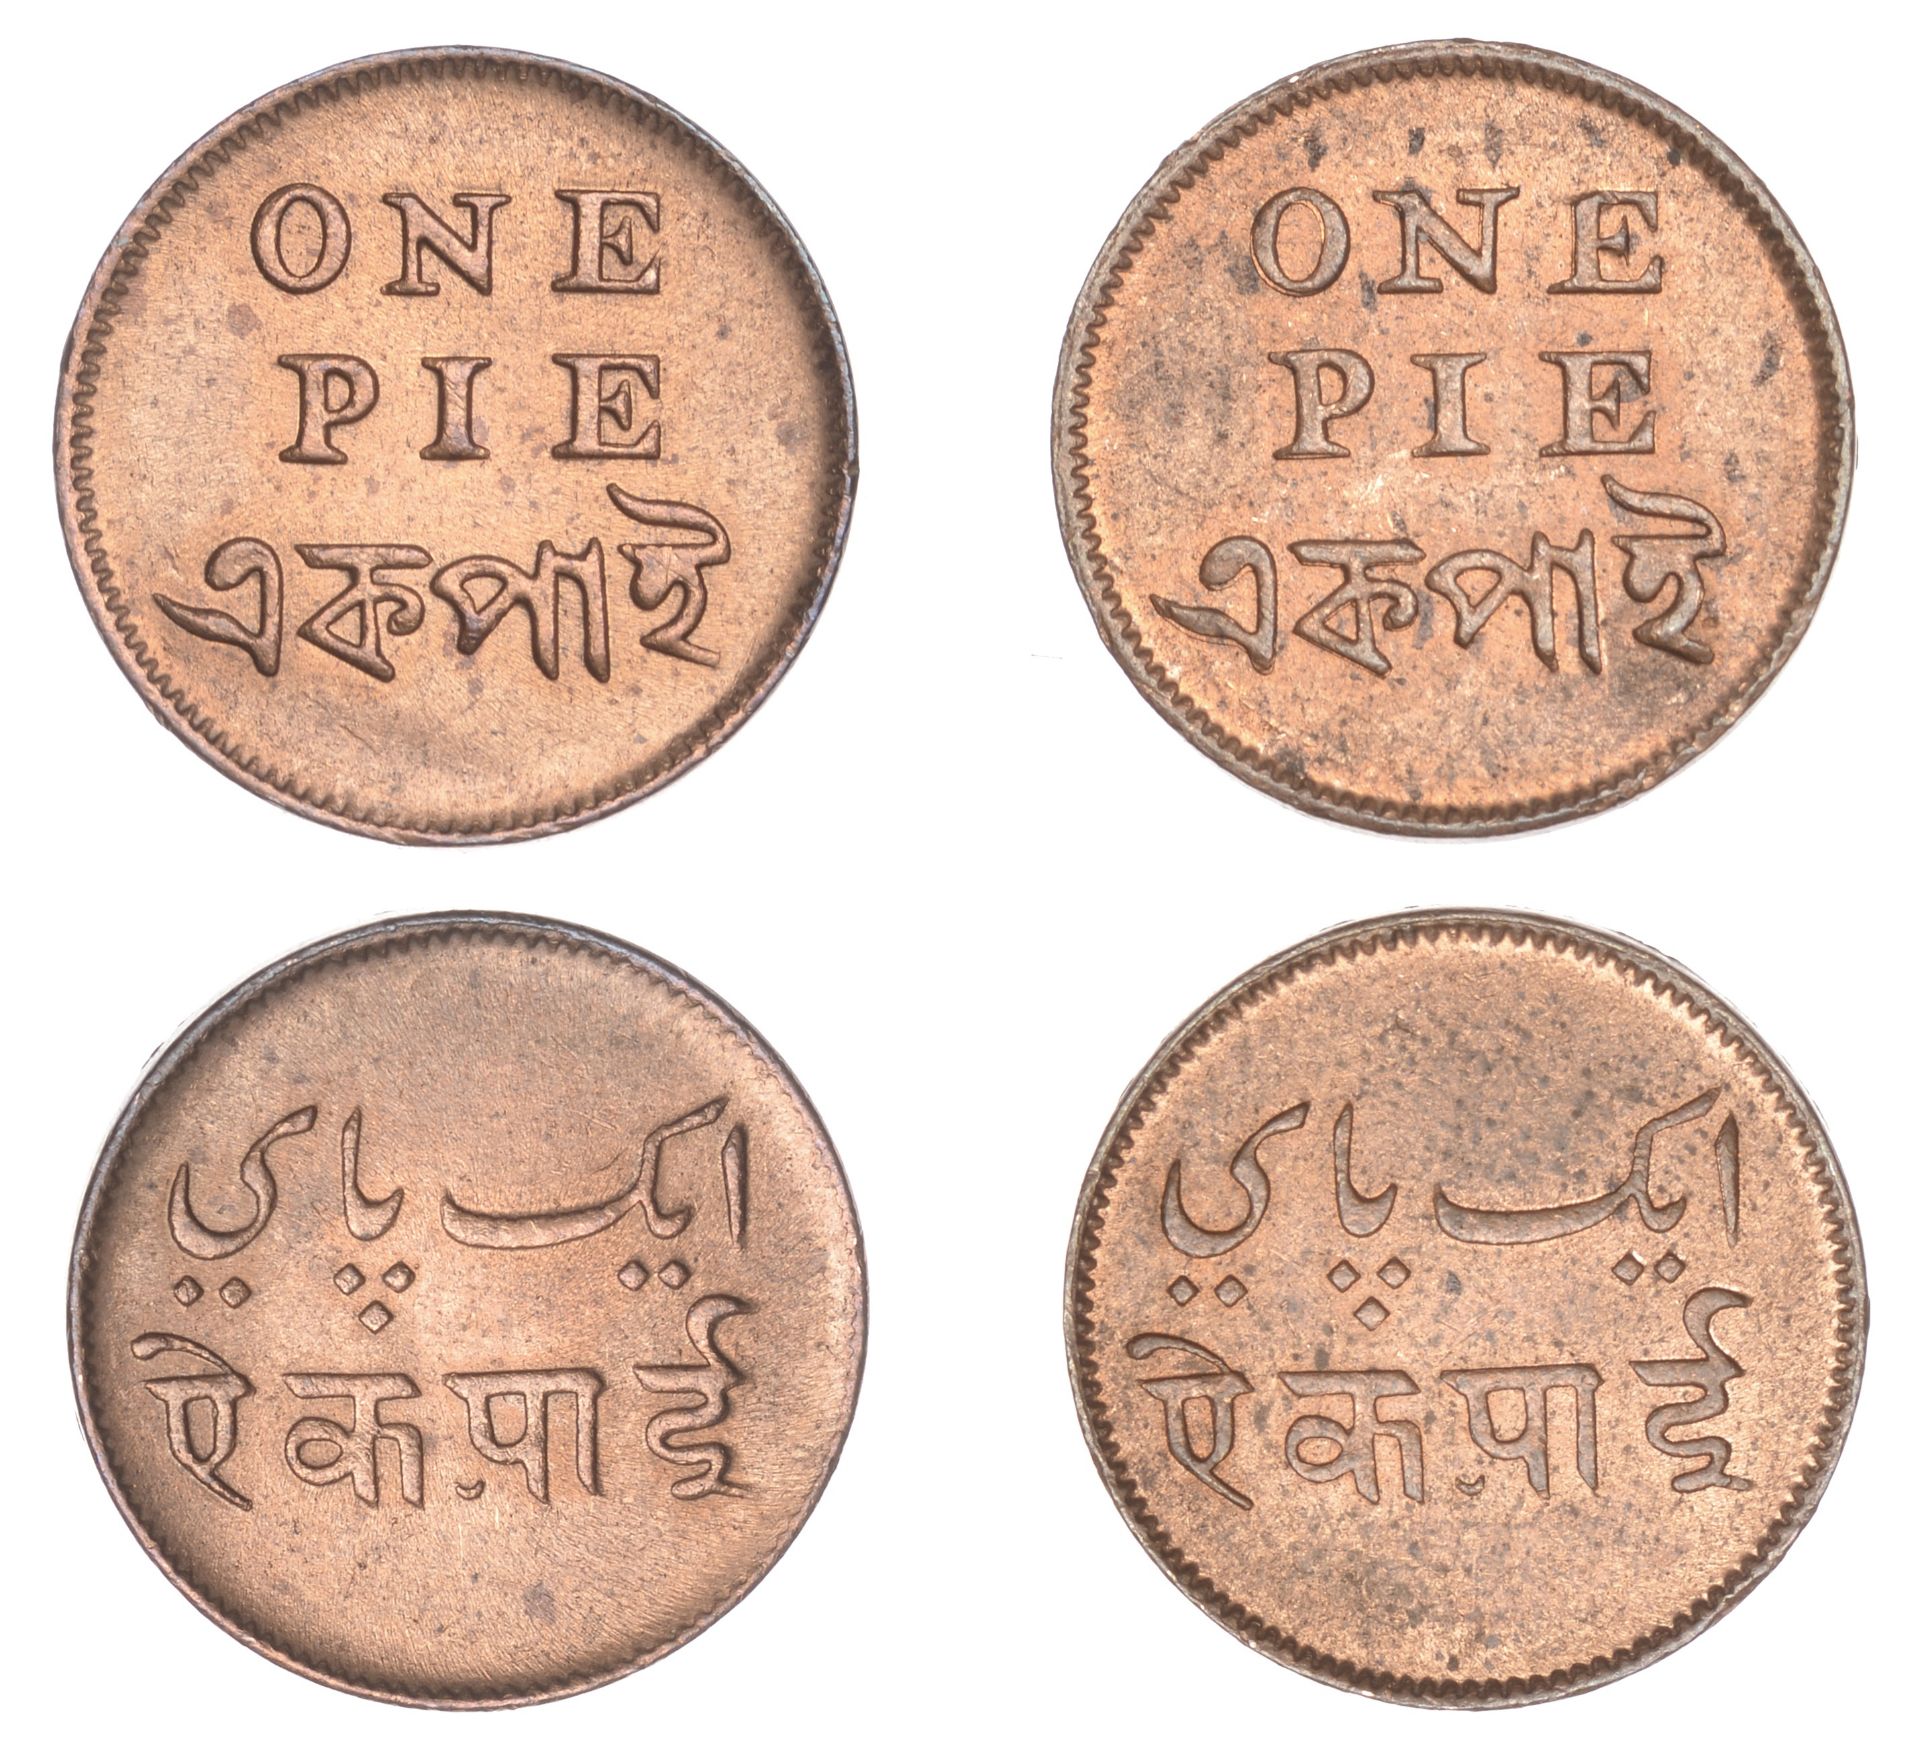 East India Company, Bengal Presidency, Calcutta Mint: Introduction of Steam, copper Pies (2)...